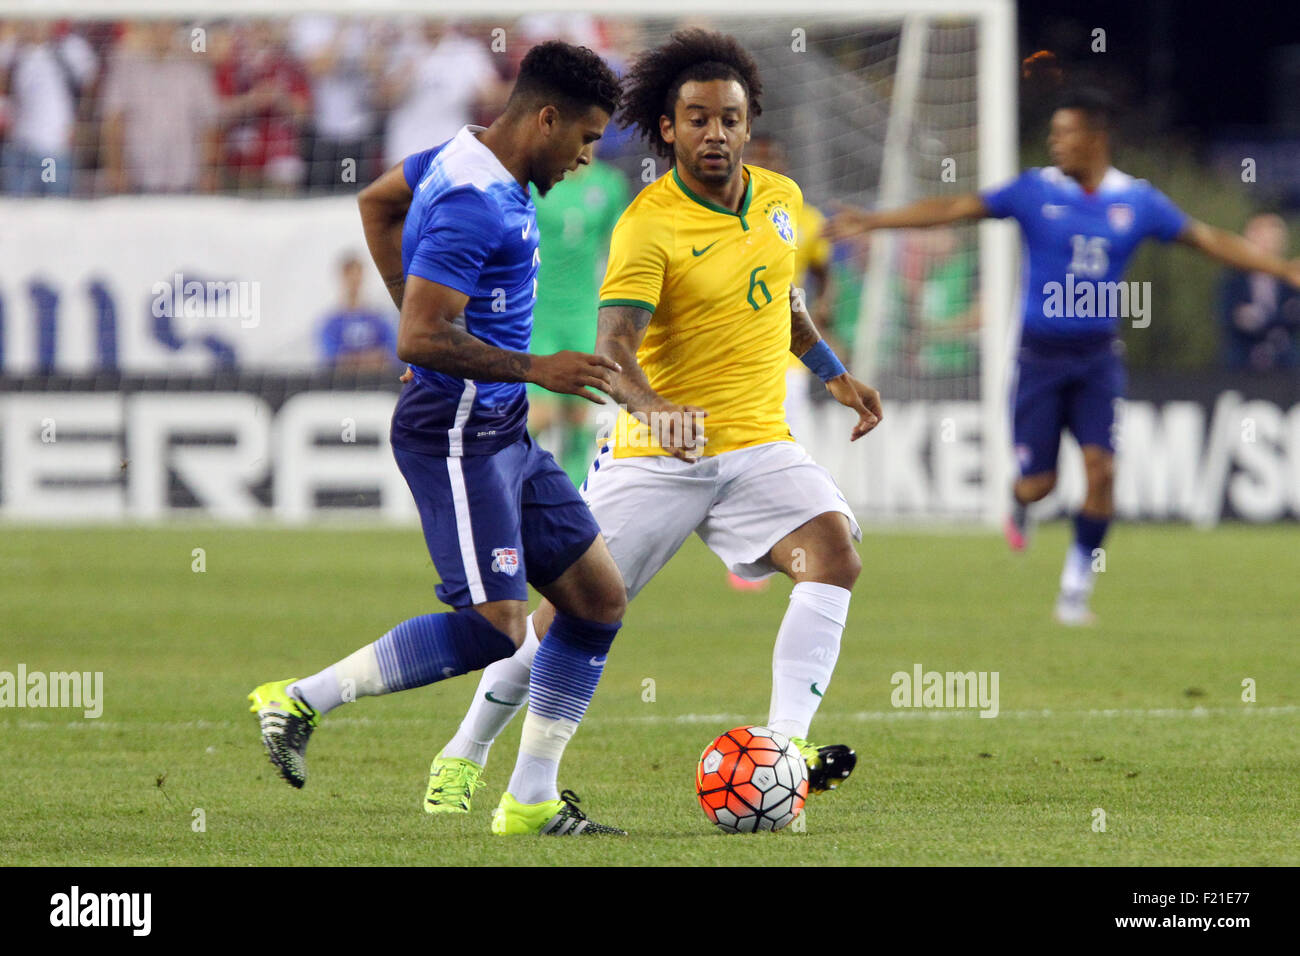 September 8, 2015; Foxborough, MA, USA; United States midfielder DeAndre Yedlin (2) and Brazil midfielder Marcelo (6) in action during the first half of the Brazil and USA international friendly match at Gillette Stadium. Brazil defeated USA 4-1. Anthony Nesmith/Cal Sport Media Stock Photo